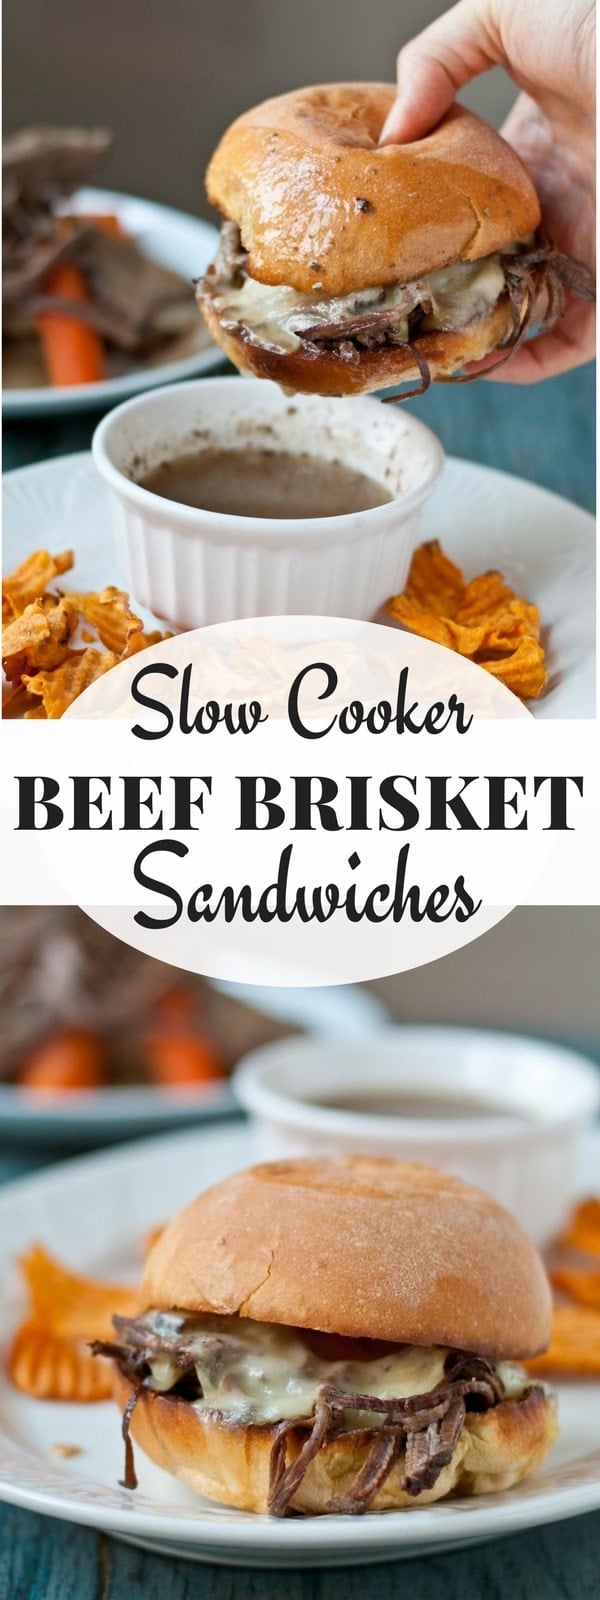 This Slow Cooker Beef Brisket makes the most incredible French Dip sandwiches! A great crock pot meal to feed a crowd!